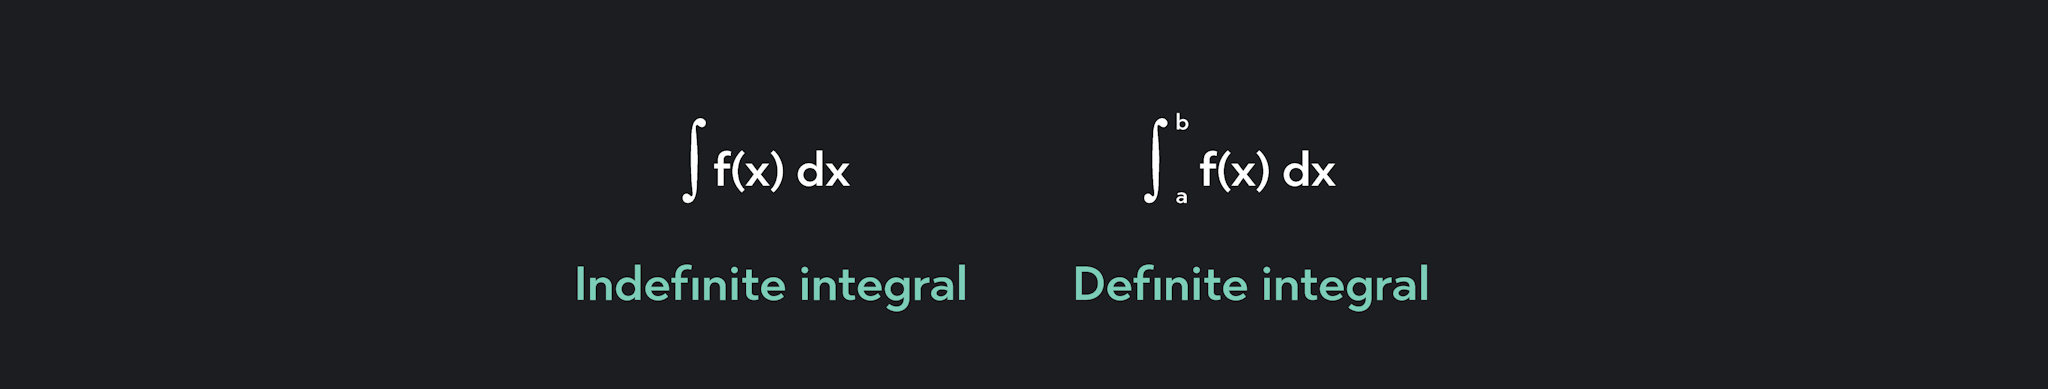 graphic  showing indefinite and definite integrals having different outputs